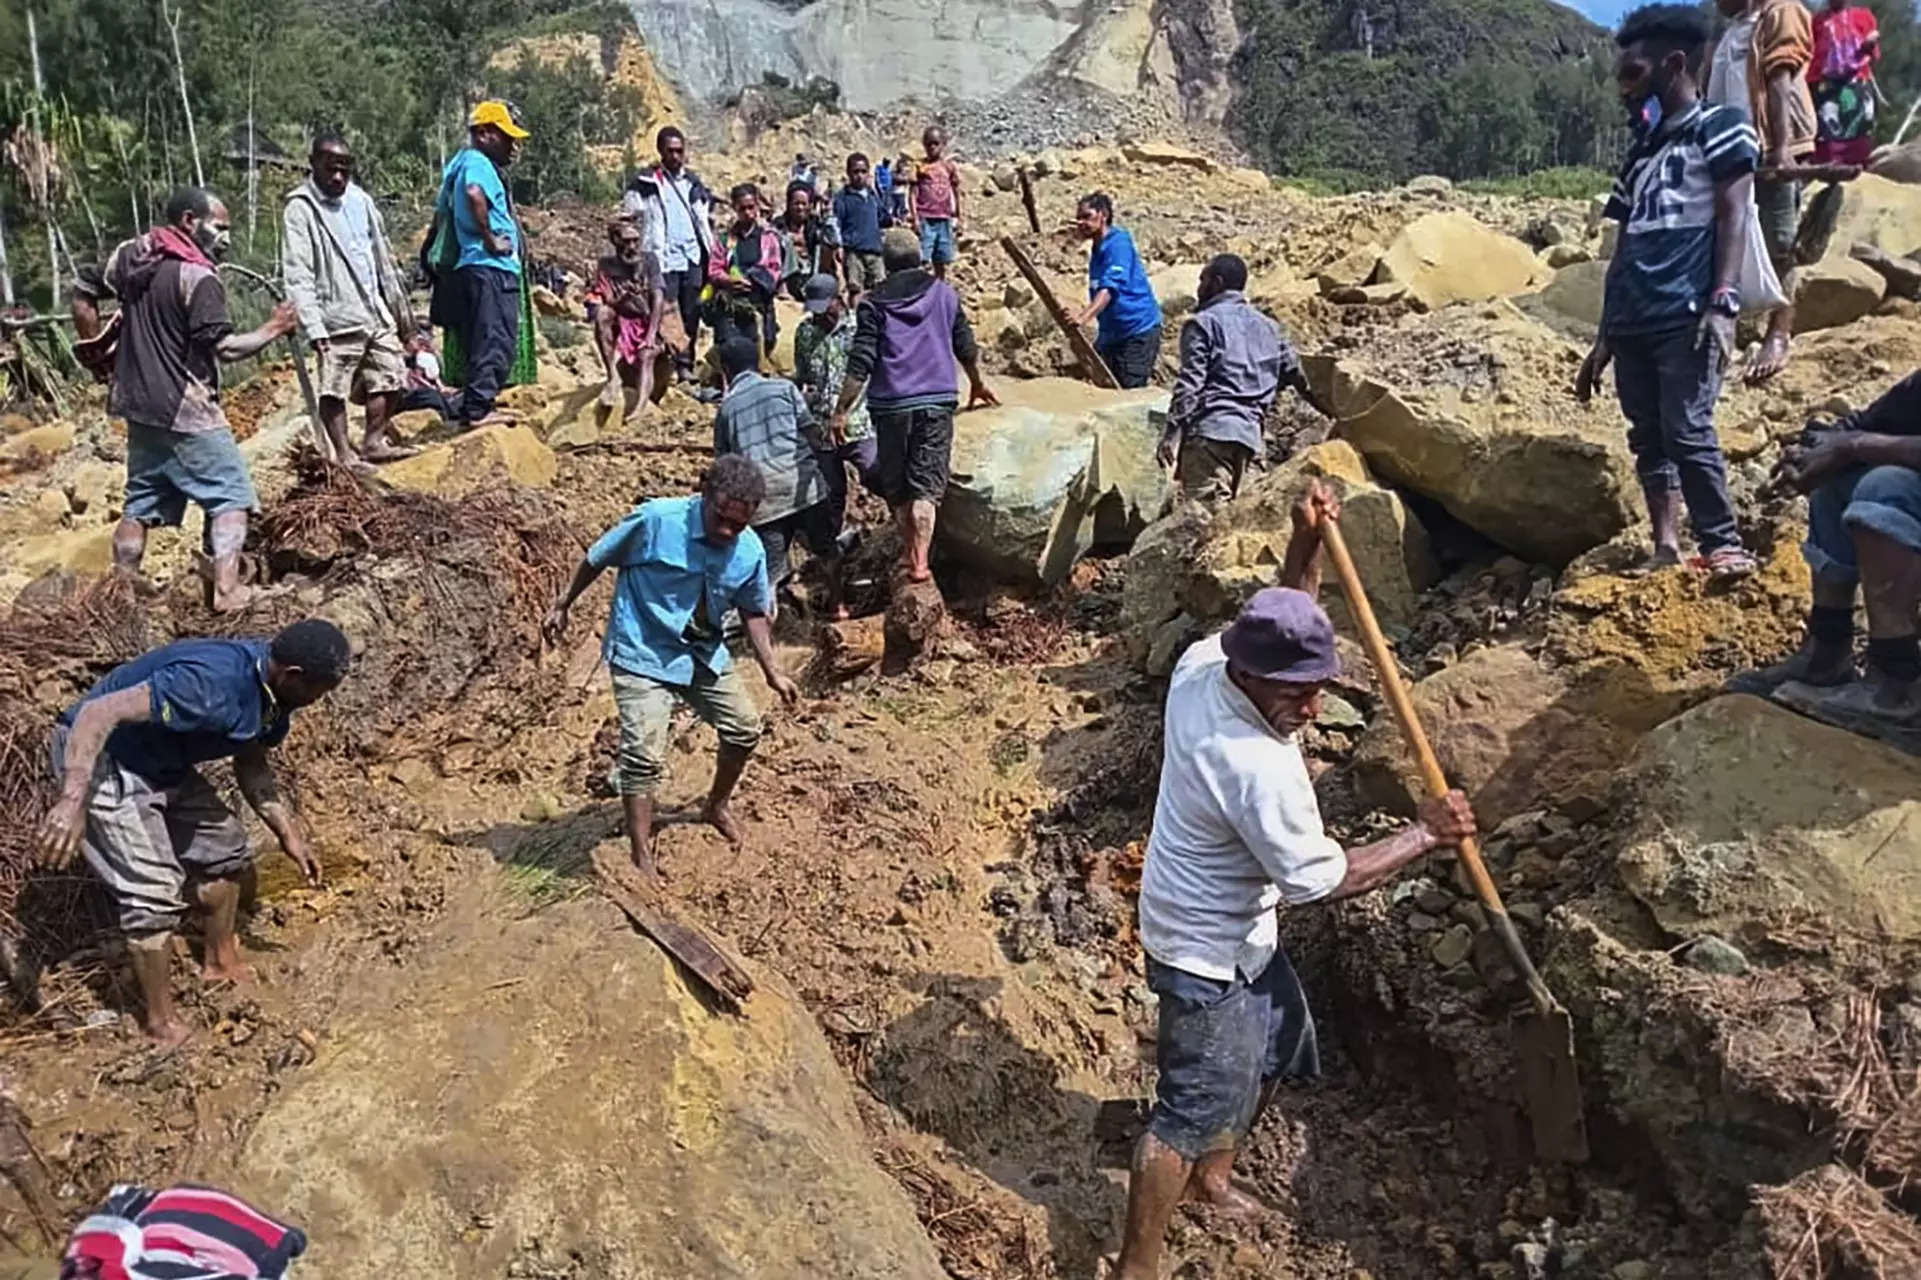 More than 2,000 people buried alive in a landslide in Papua New Guinea 